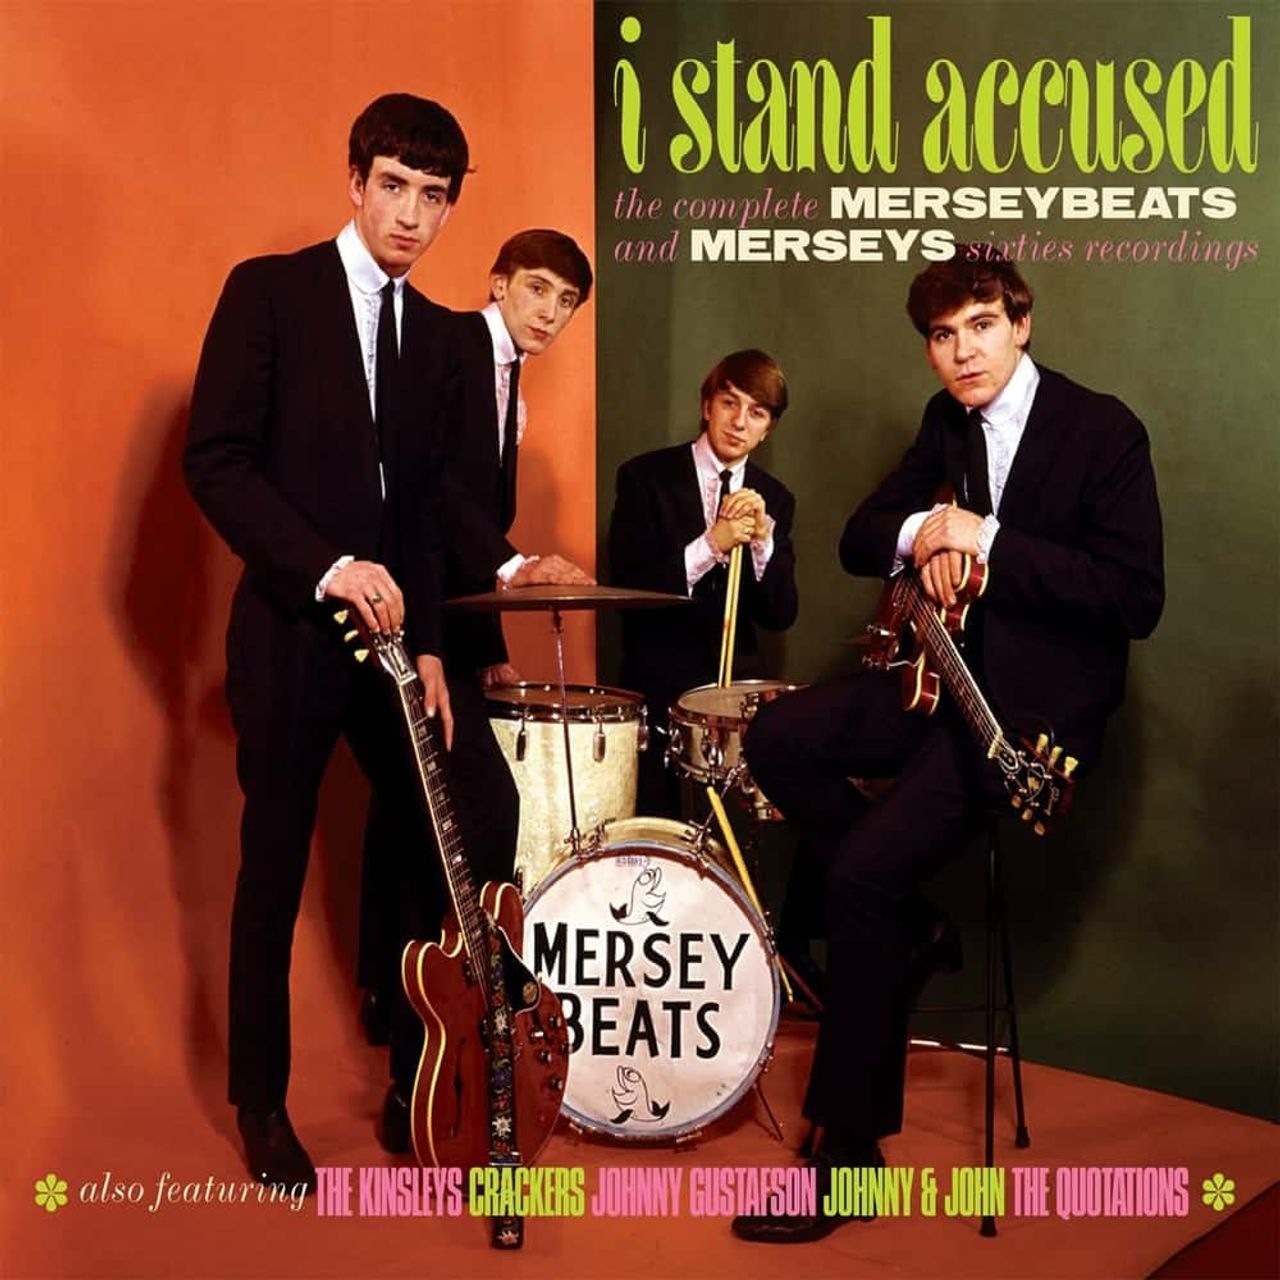 The Merseybeats I Stand Accused: The Complete Merseybeats And Merseys Sixties Recordings - Sealed UK 2 CD album set (Double CD) CRSEG092D